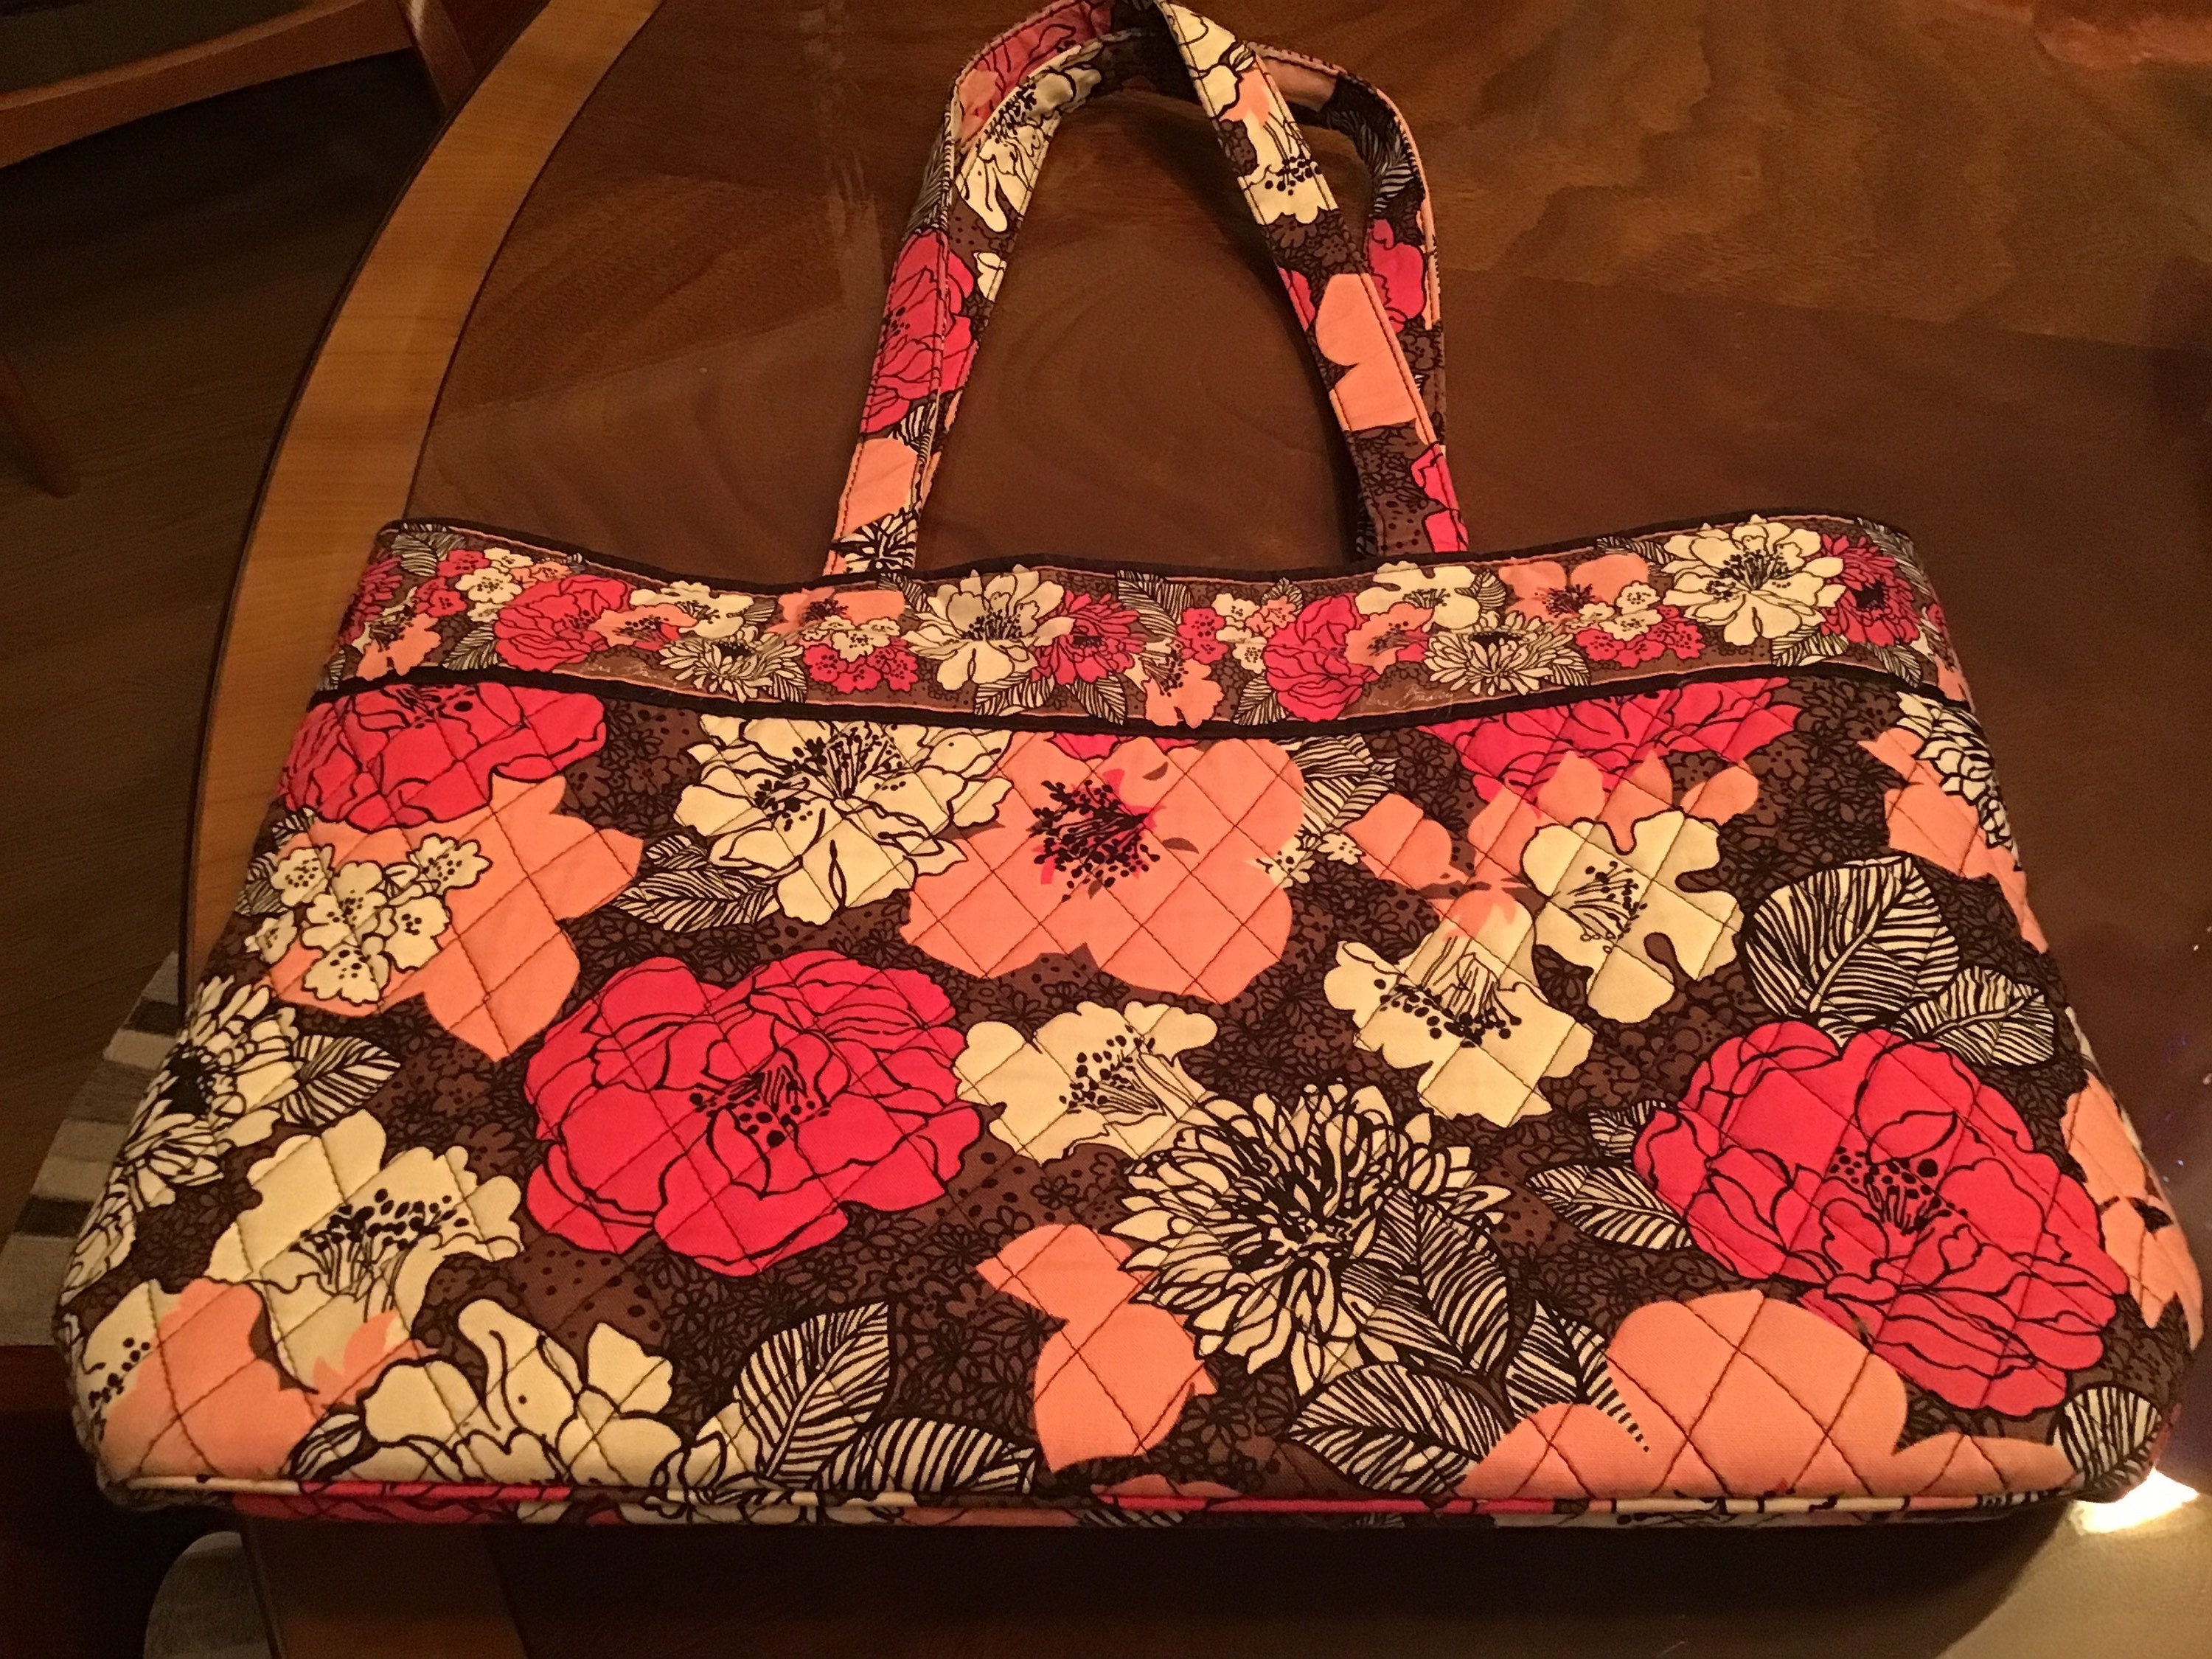 Large Vera Bradley Quilted Shoulder Bag in A Floral Design in Retired Pattern Mocha Rouge from Fall 2011